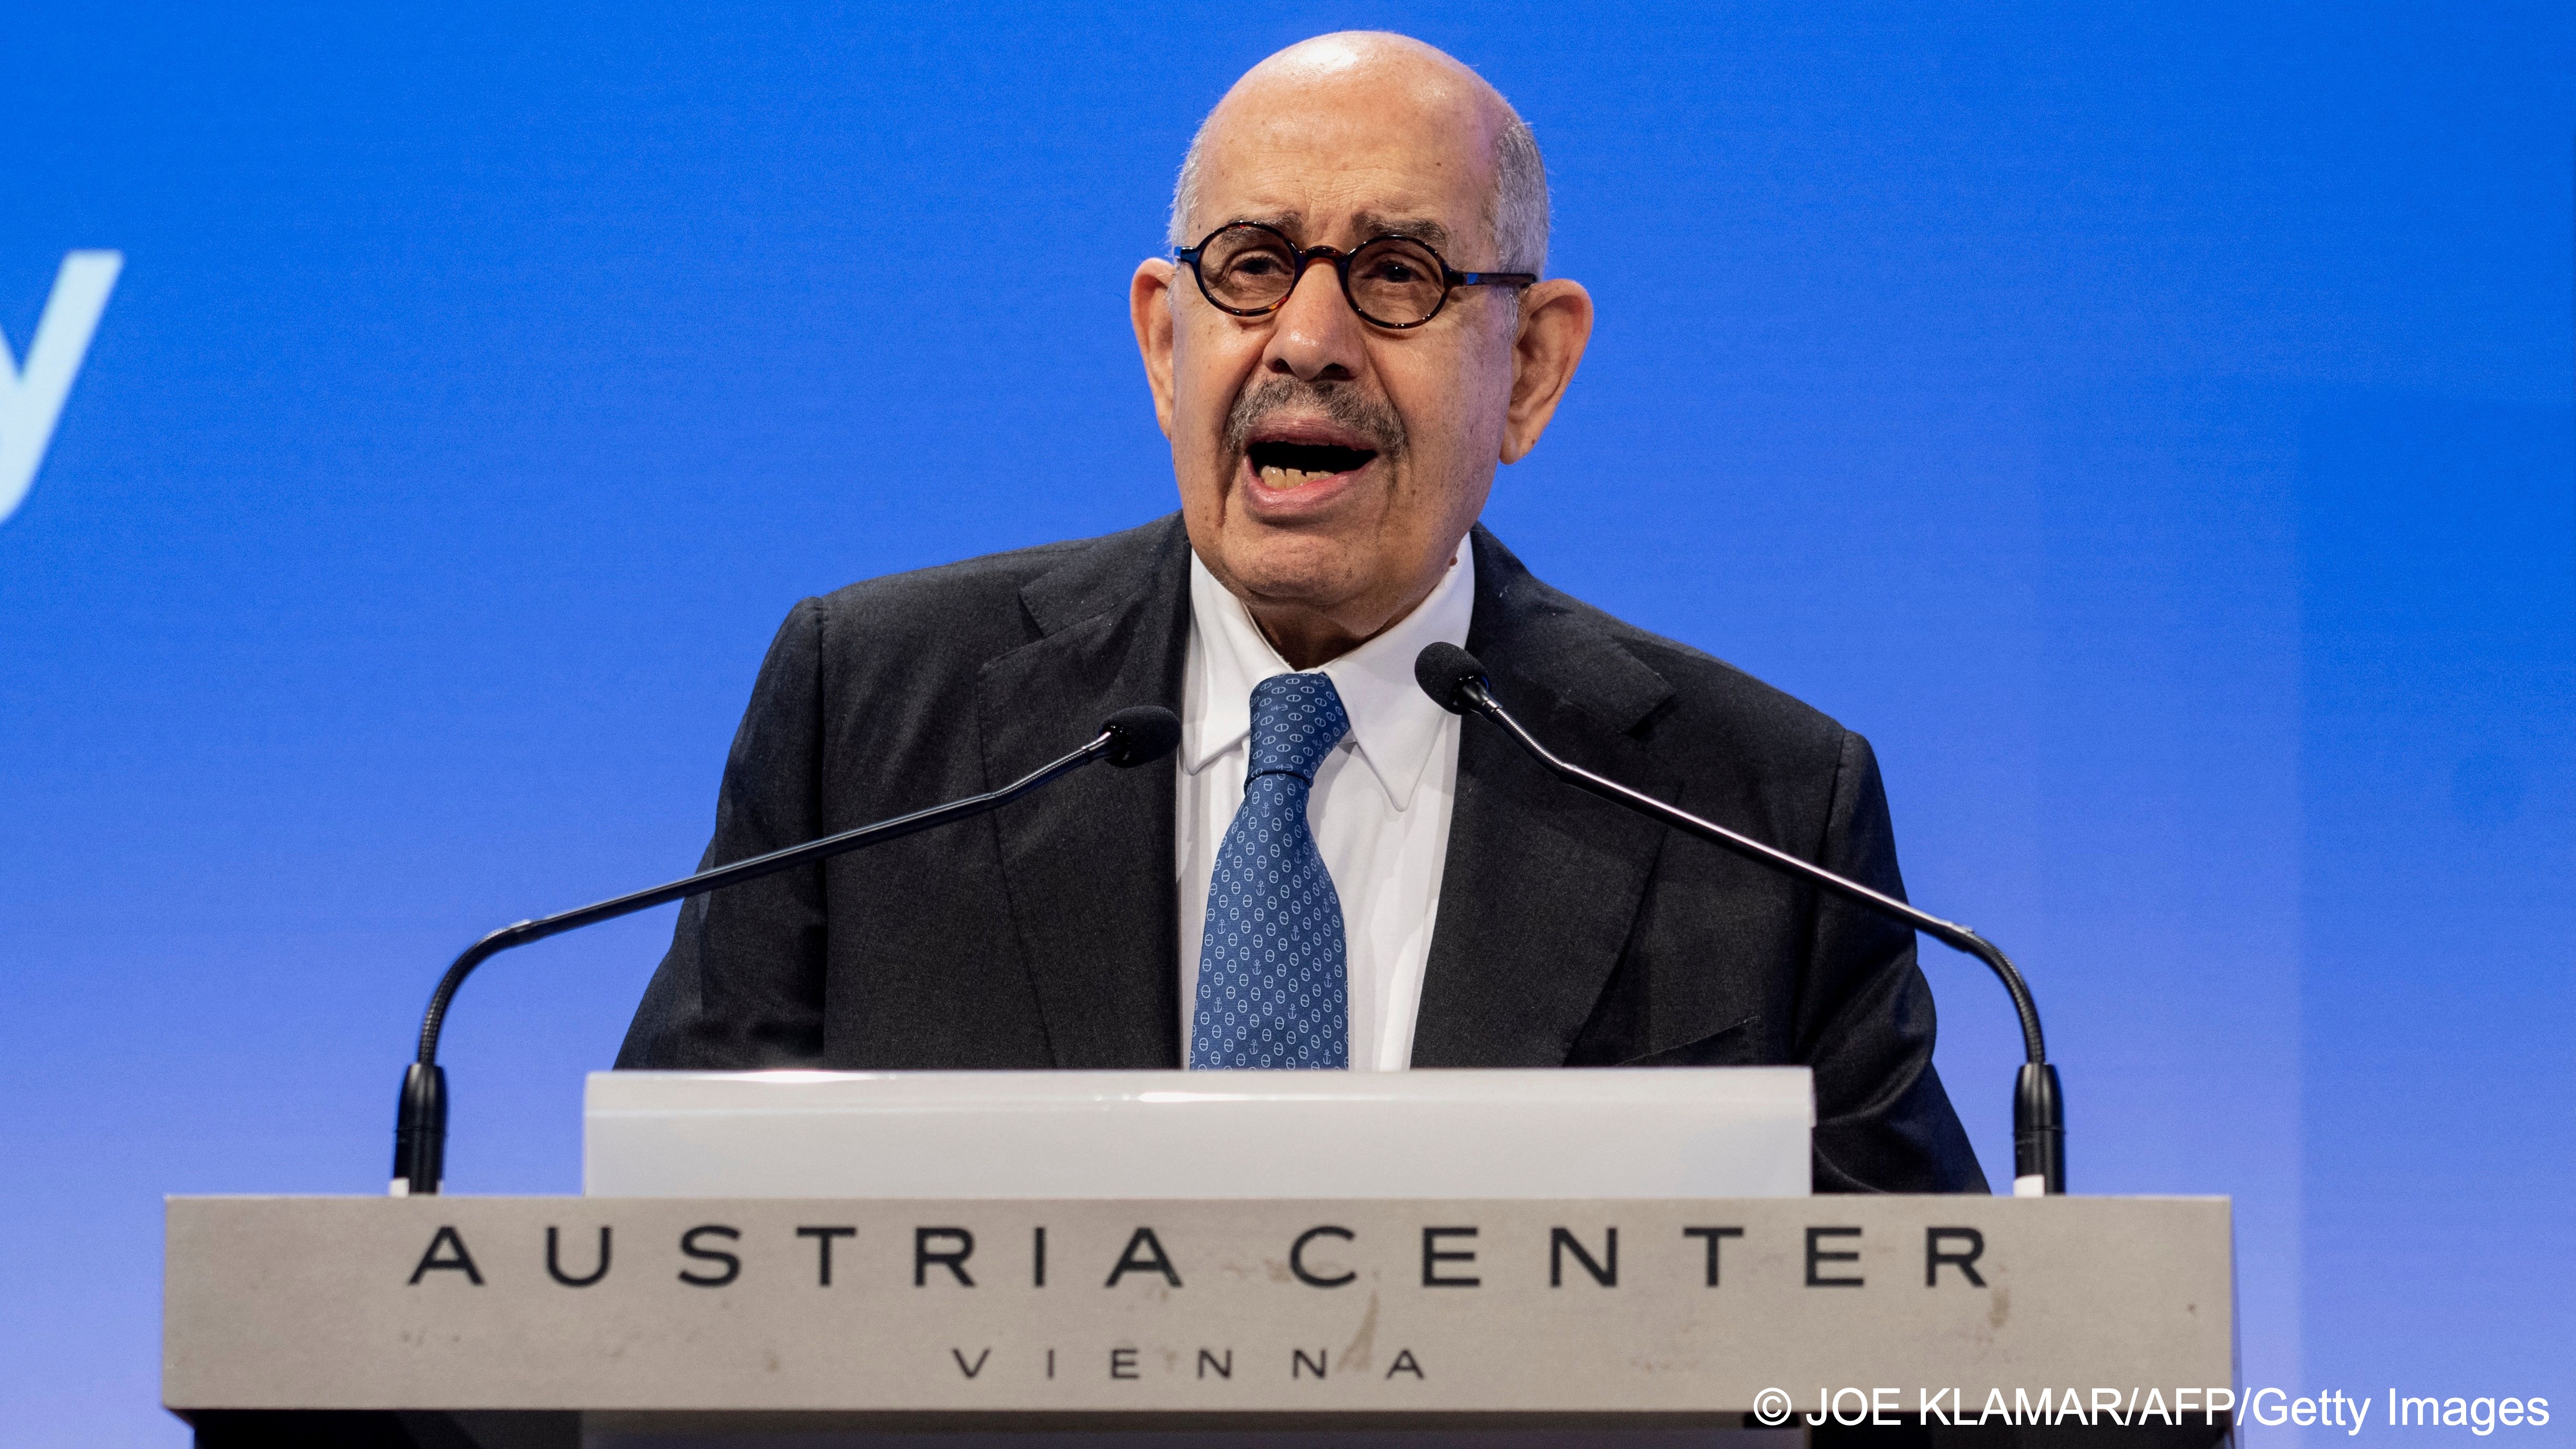 Mohamed ElBaradei, Director General Emeritus of the International Atomic Energy Agency and Nobel Peace Prize Laureate (2005), speaks during the 2022 Vienna Conference on the Humanitarian Impact of Nuclear Weapons at the Austrian Centre in Vienna, Austria